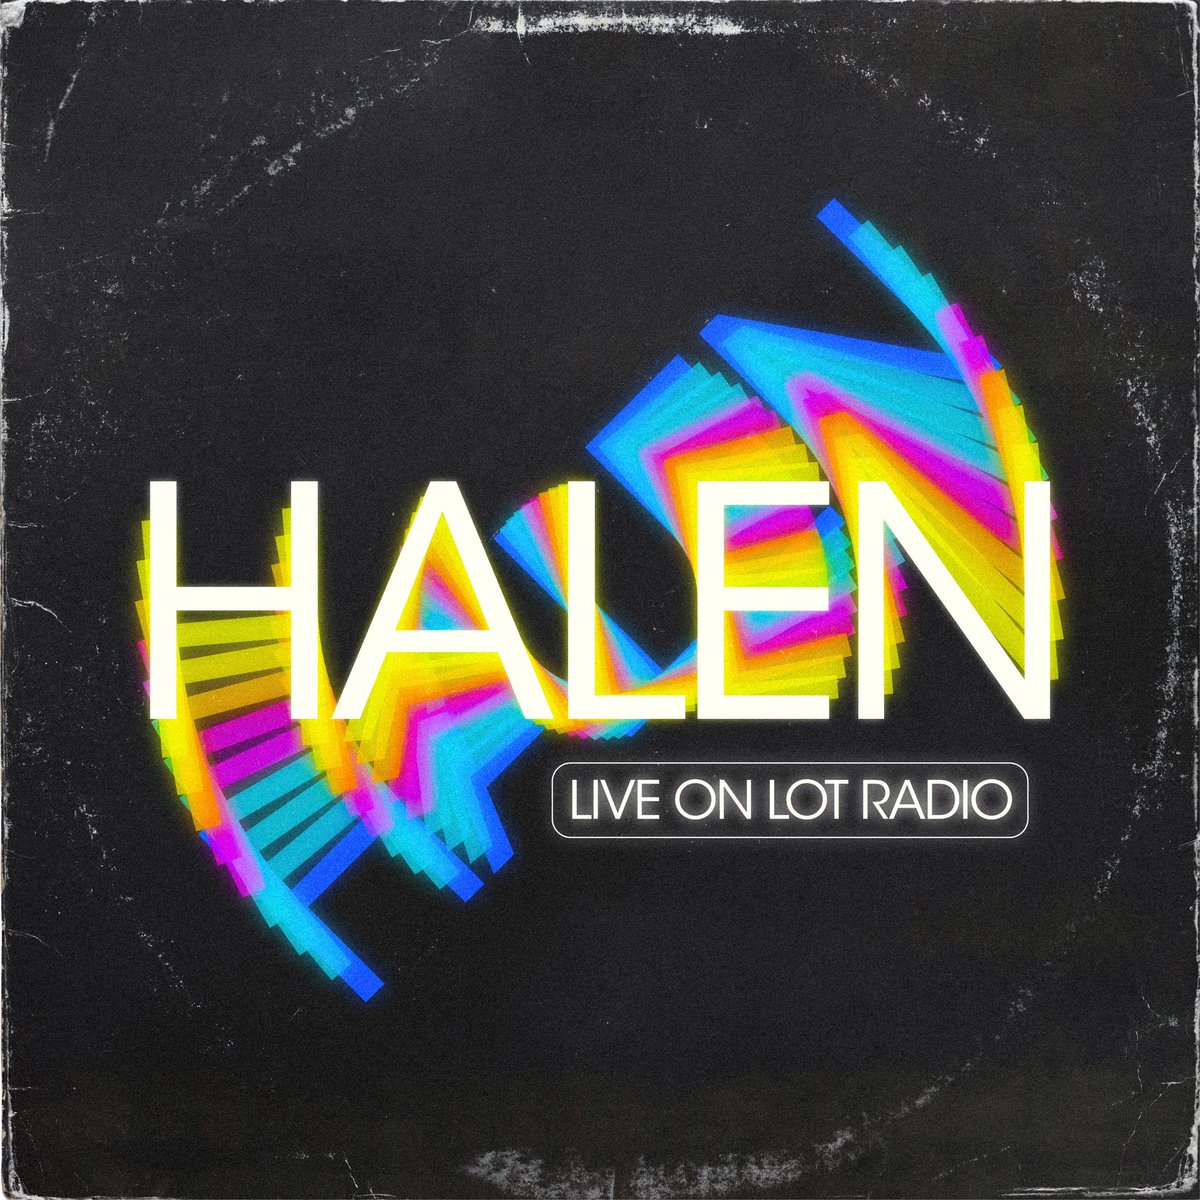 HALEN - LIVE ON LOT RADIO Last month I was invited by @sgld to perform on The Lot Radio. I laid down a set of shimmering disco house alongside an array of jack, funk, tech house, certified bangers and anthemic club classics. LISTEN HERE - on.soundcloud.com/1vh1VF3kshQz3c…